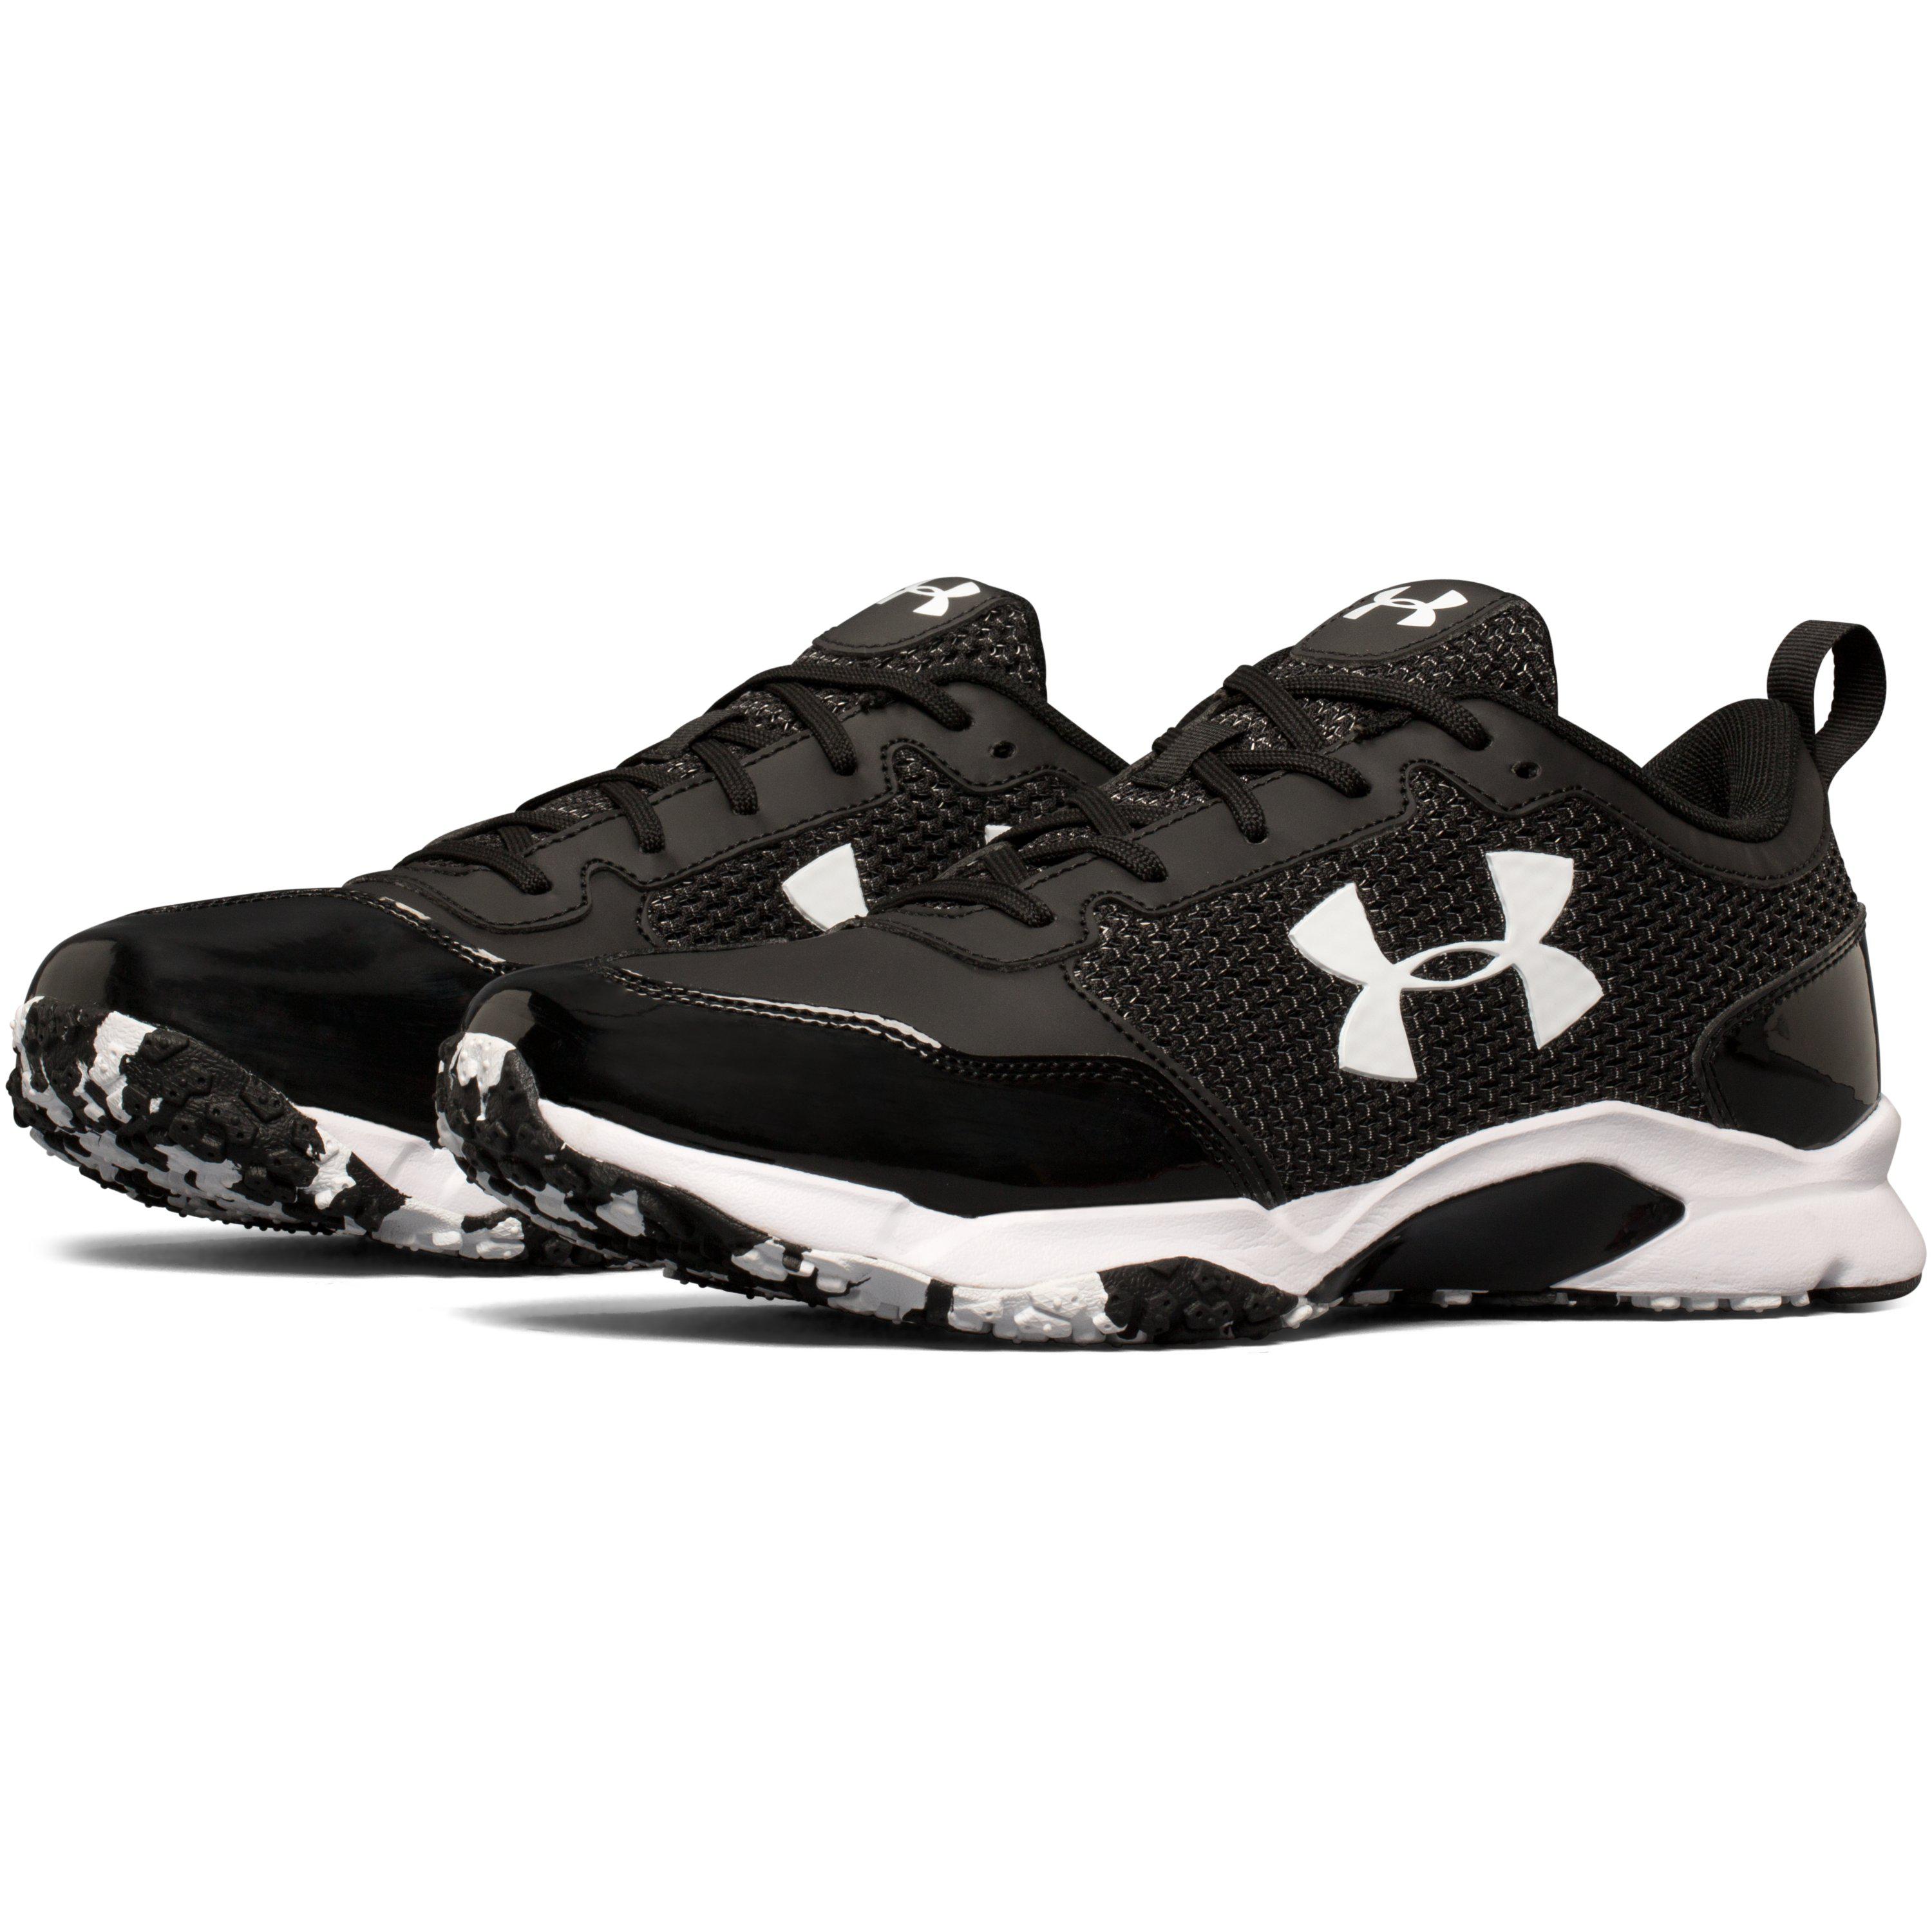 Under Armour Men's Ultimate Turf Trainer New Black/Black FREE POSTAGE 1292146 